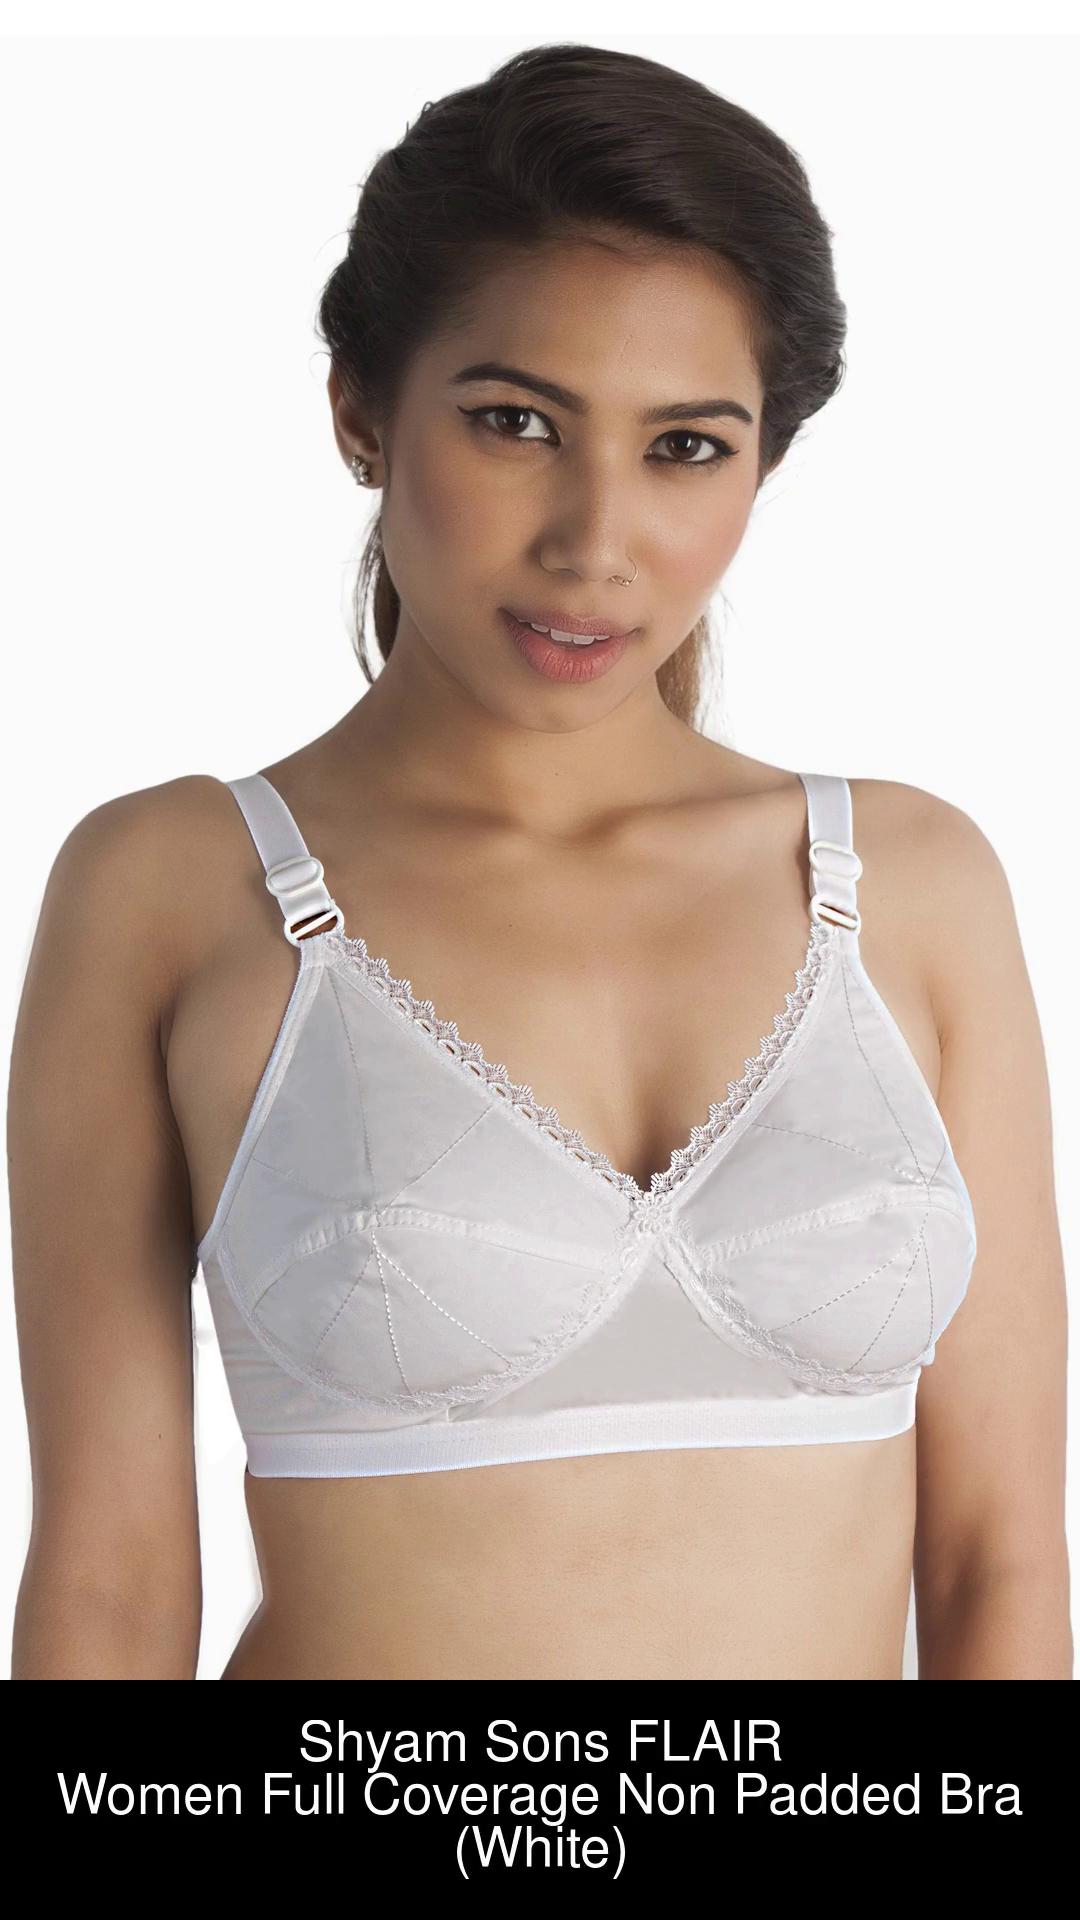 Buy Shyam Sons FLAIR Full Coverage Daily Use Bra for Women, Cotton Blend Underwire  Bra with Adjustable Straps, Non Padded and Double Layered White at